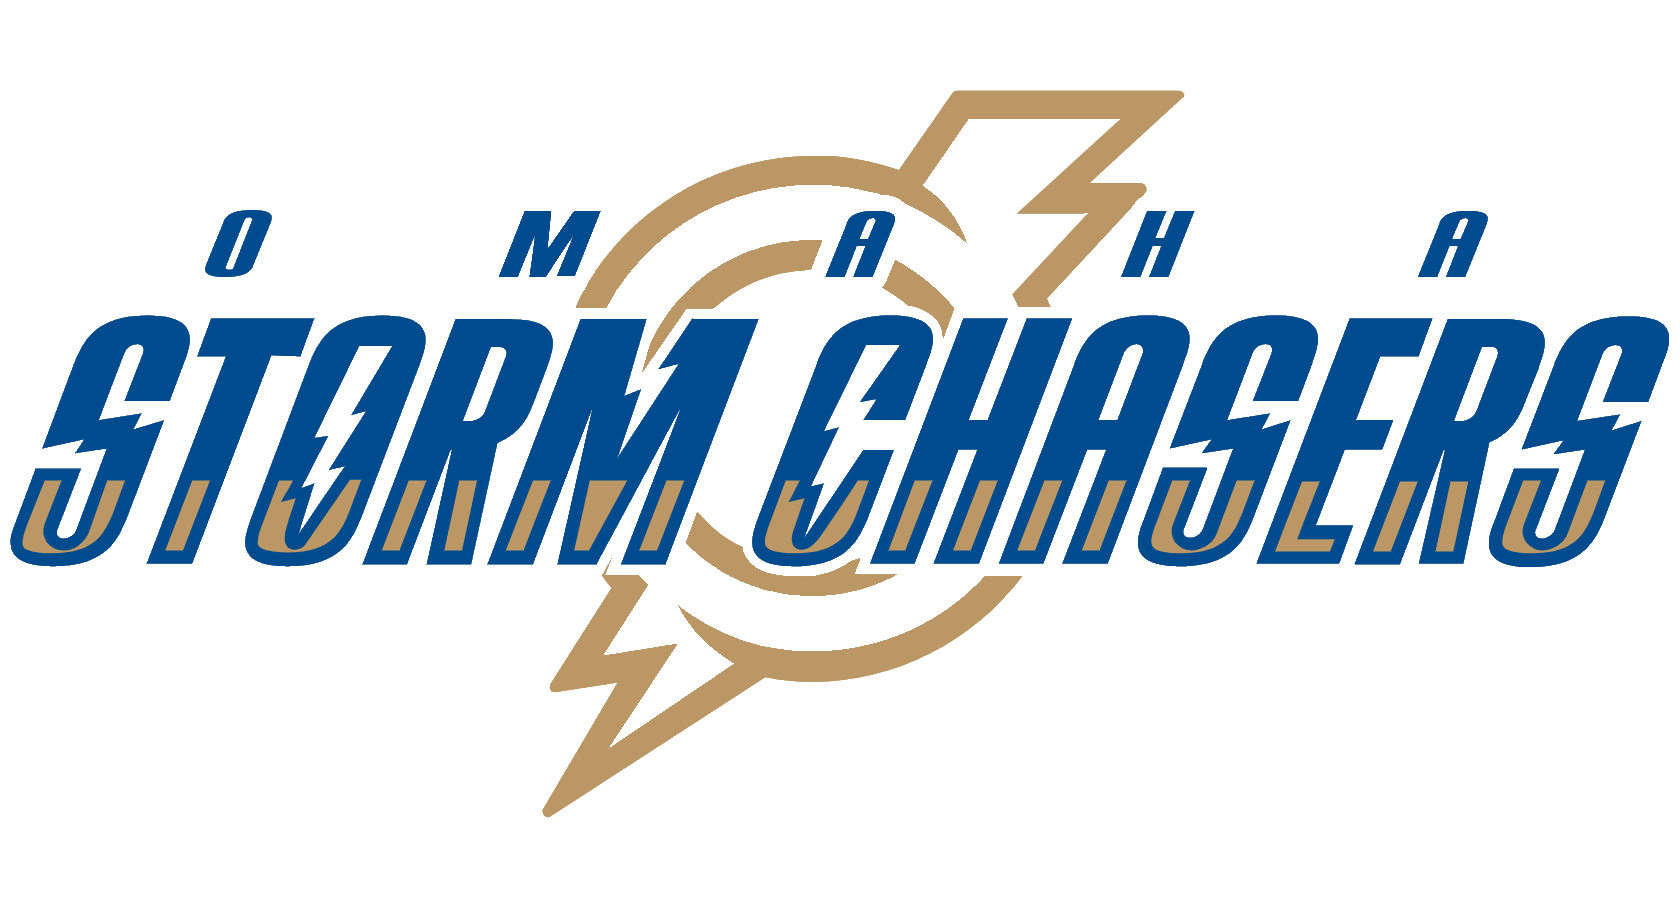 Omaha Storm Chasers - Wikipedia